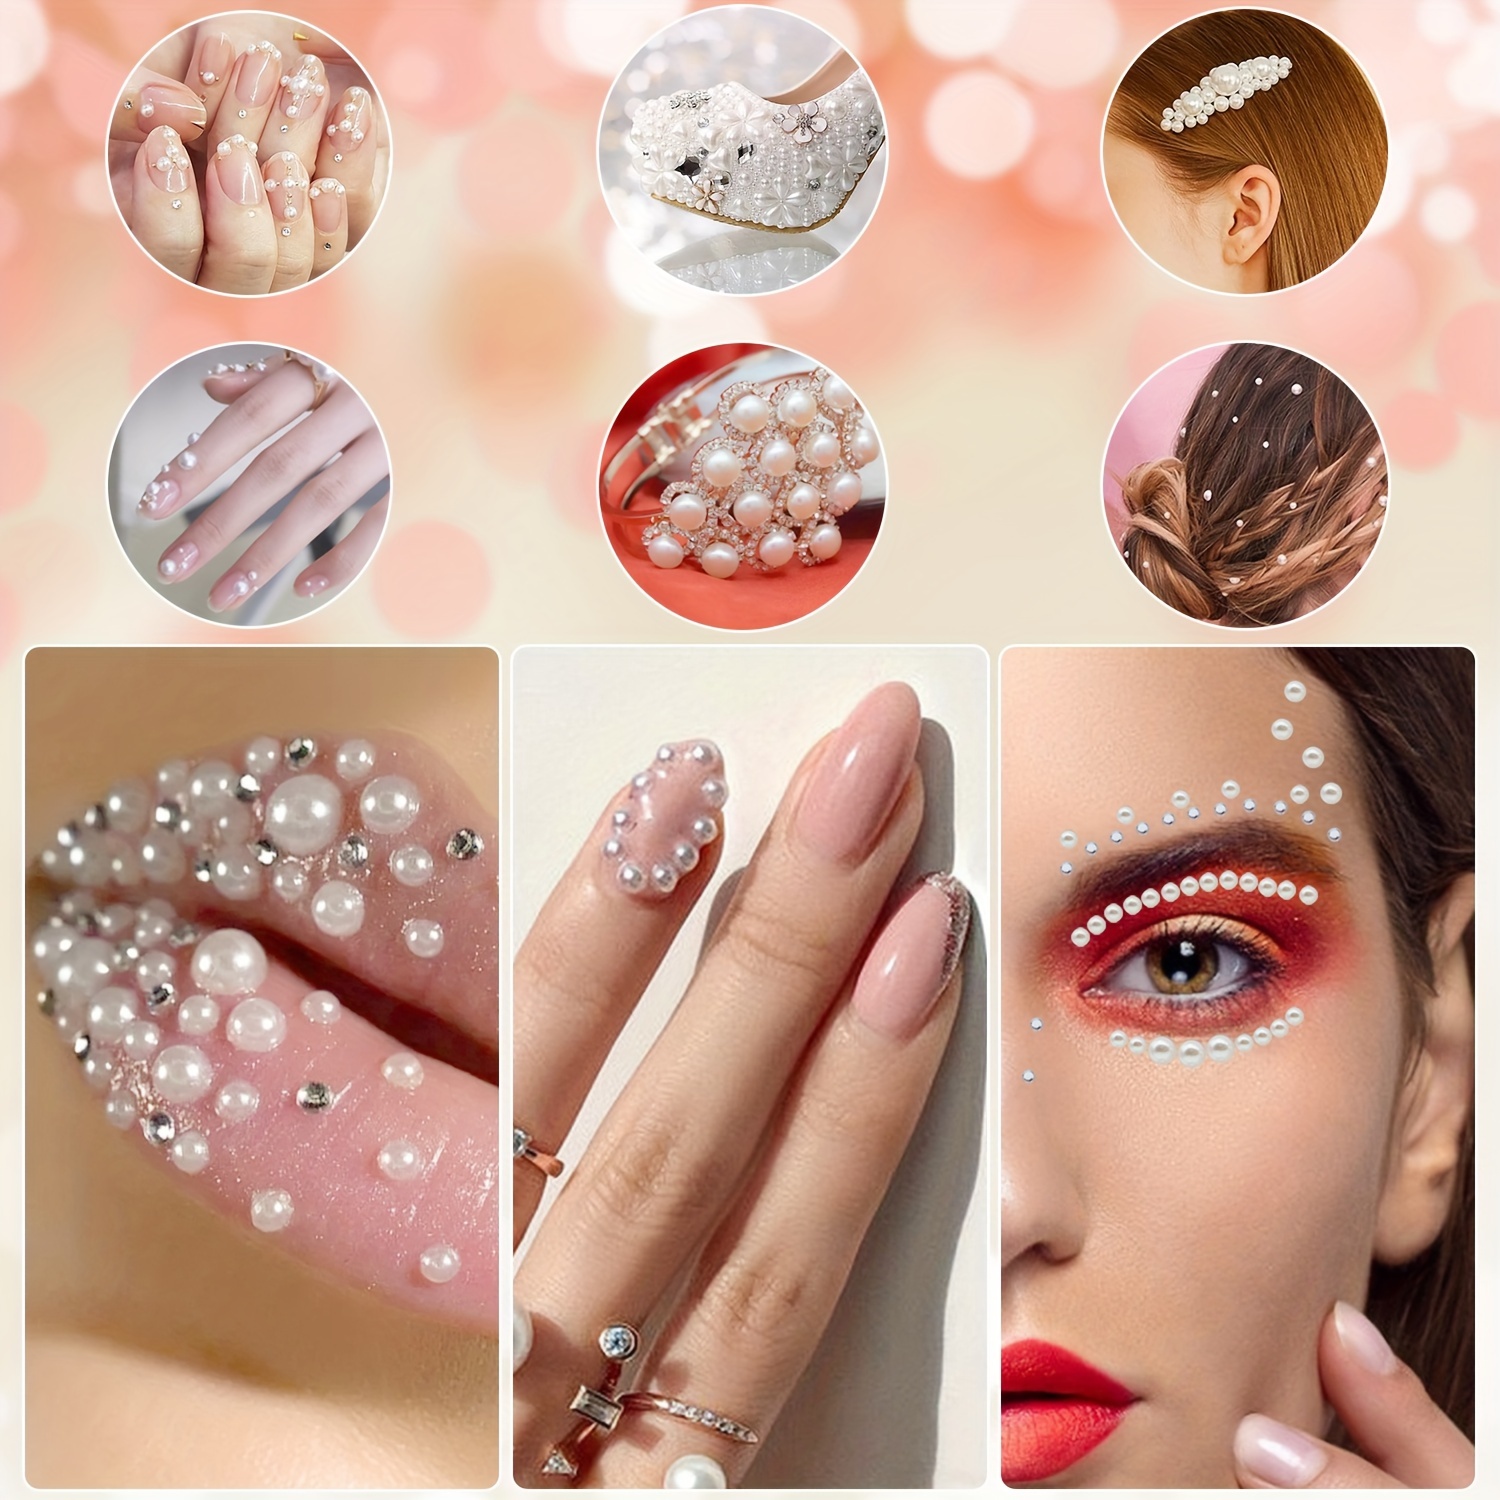 Elf Face Gems Stick On, Face Jewels Stickers Self-Adhesive Face Diamonds Rhinestones for Arm Body Nail Decoration Party, Size: 14cm*25cm